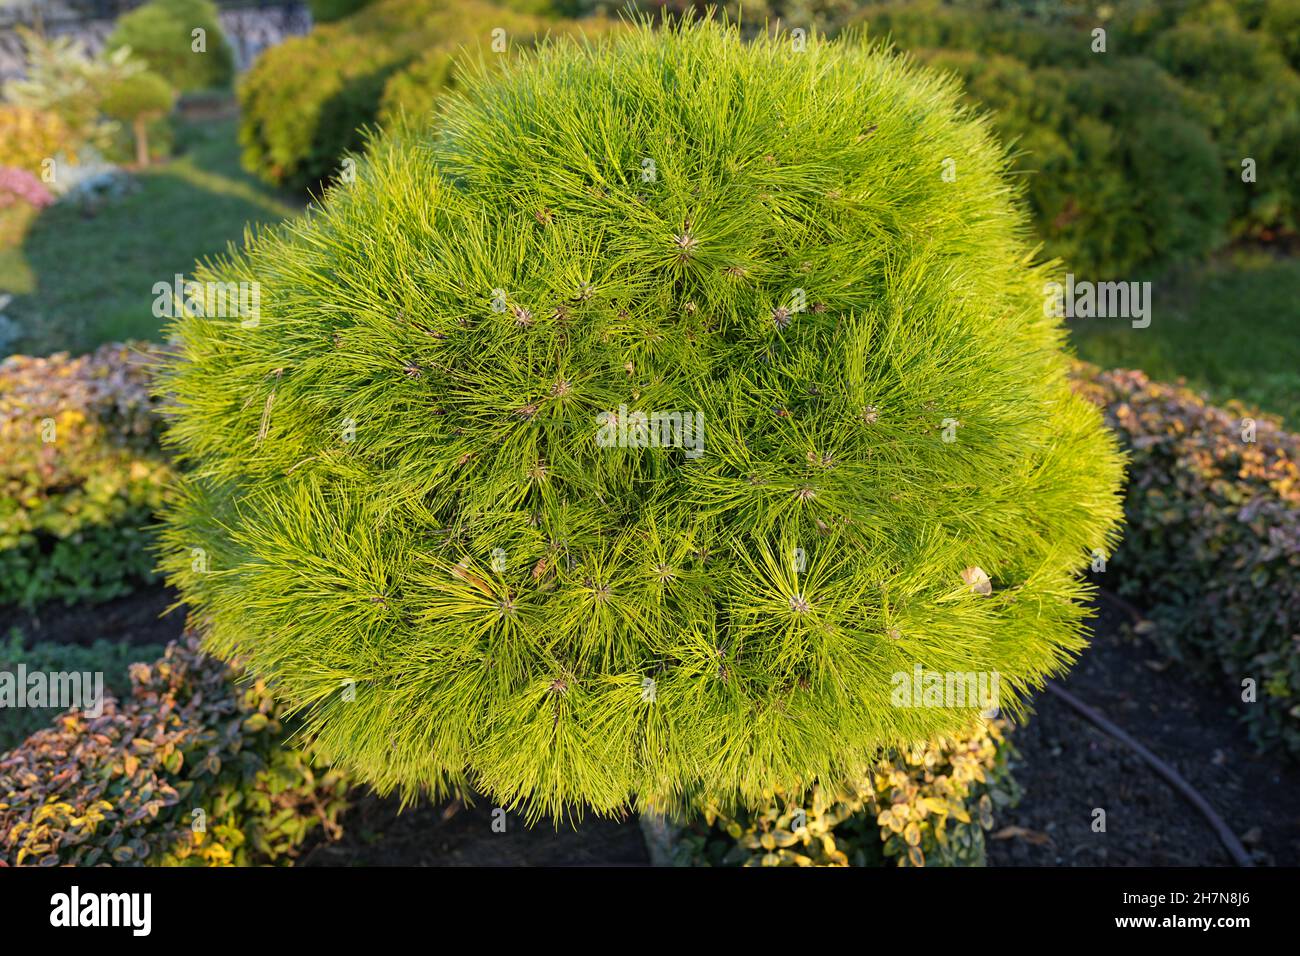 Decorative coniferous tree with a spherical crown Stock Photo